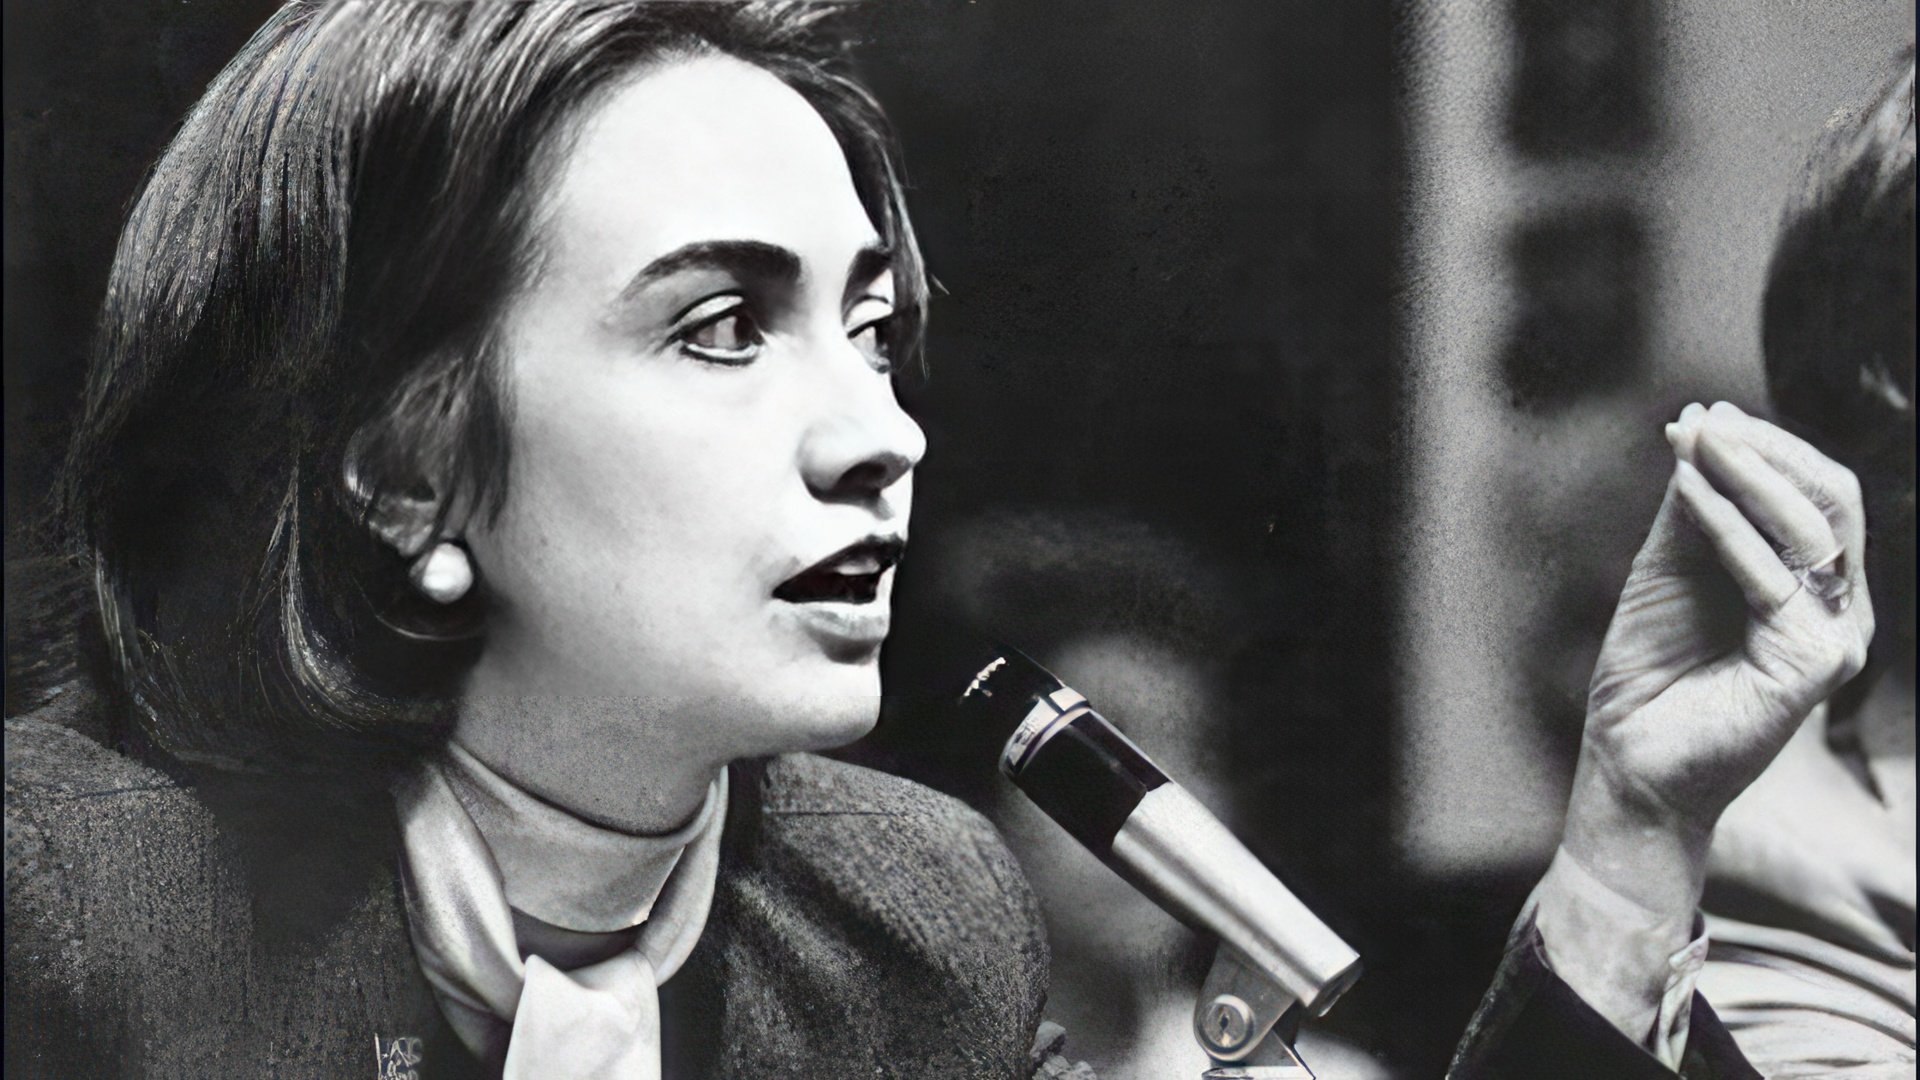 In 1974, Hillary Clinton’s Activity Contributed to the Retirement of Richard Nixon